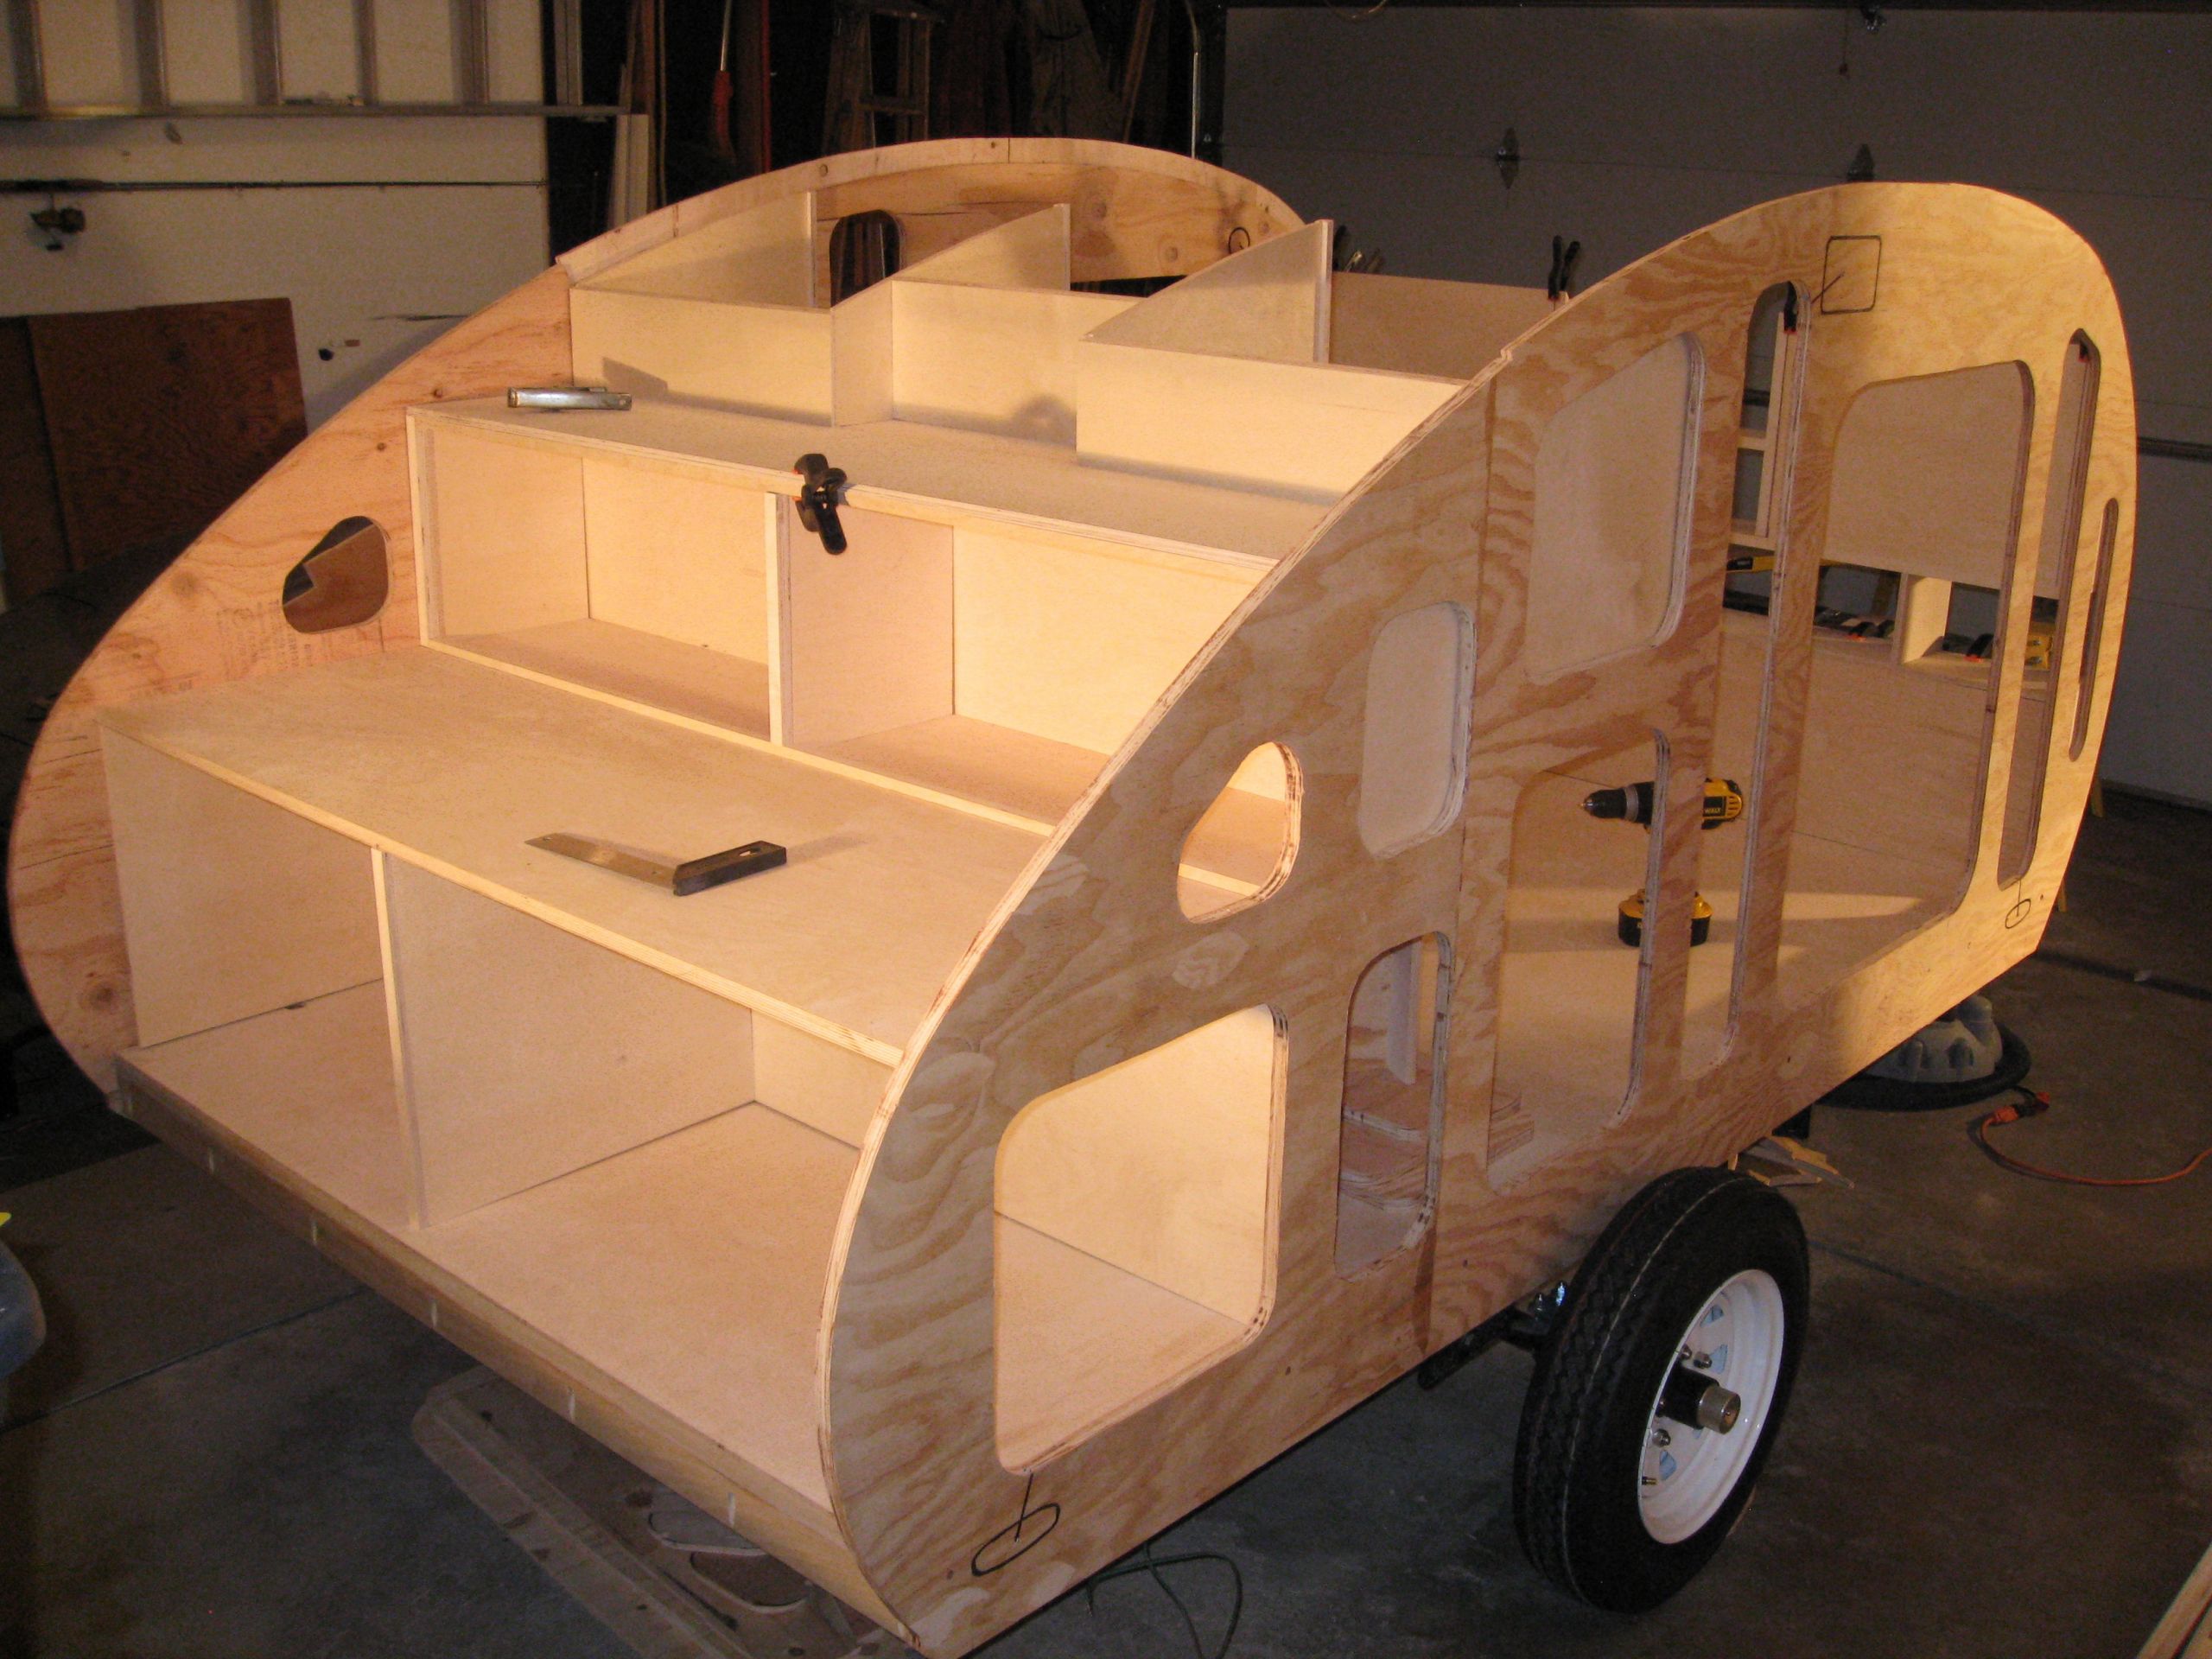 DIY Teardrop Trailer Plans
 How to Build Your Custom Teardrop Trailer Quickly and Easily